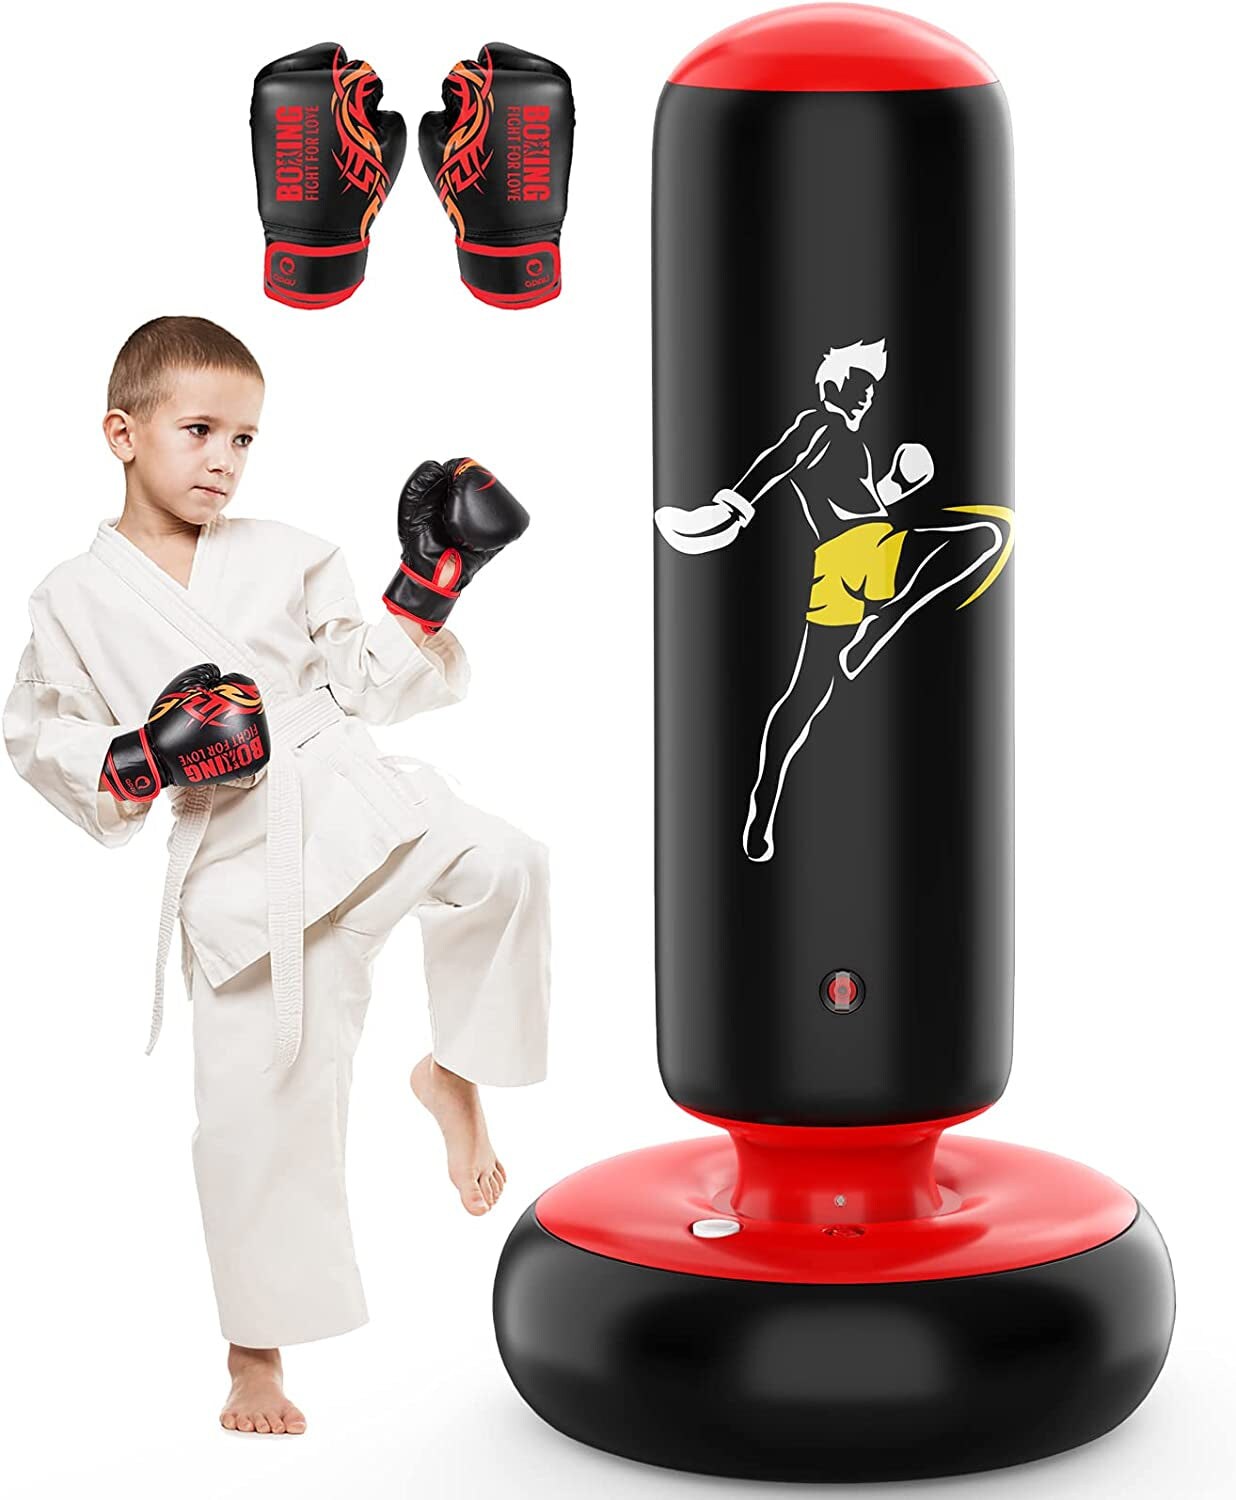 Larger Stable Punching Bag for Kids, Tall 66 Inch Inflatable Boxing Bag, Gifts Boys & Girls Age 5-12 for Practicing Karate, Taekwondo, MMA to Relieve Pent Energy in